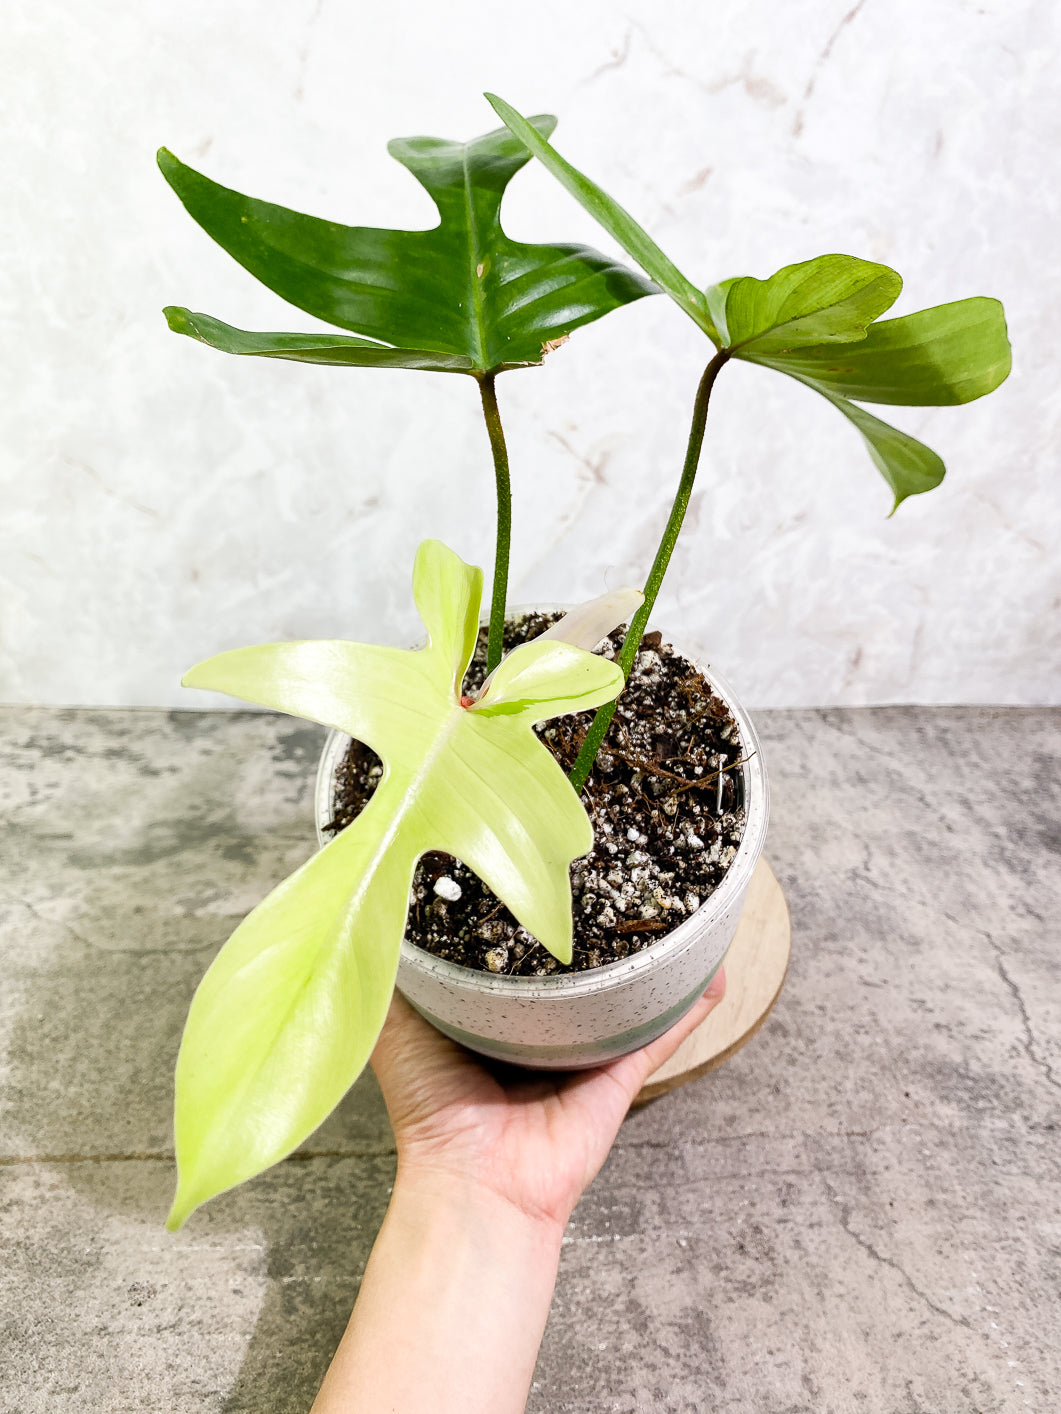 Philodendron Florida ghost mint variegated 4 leaves 1 sprout fully rooted